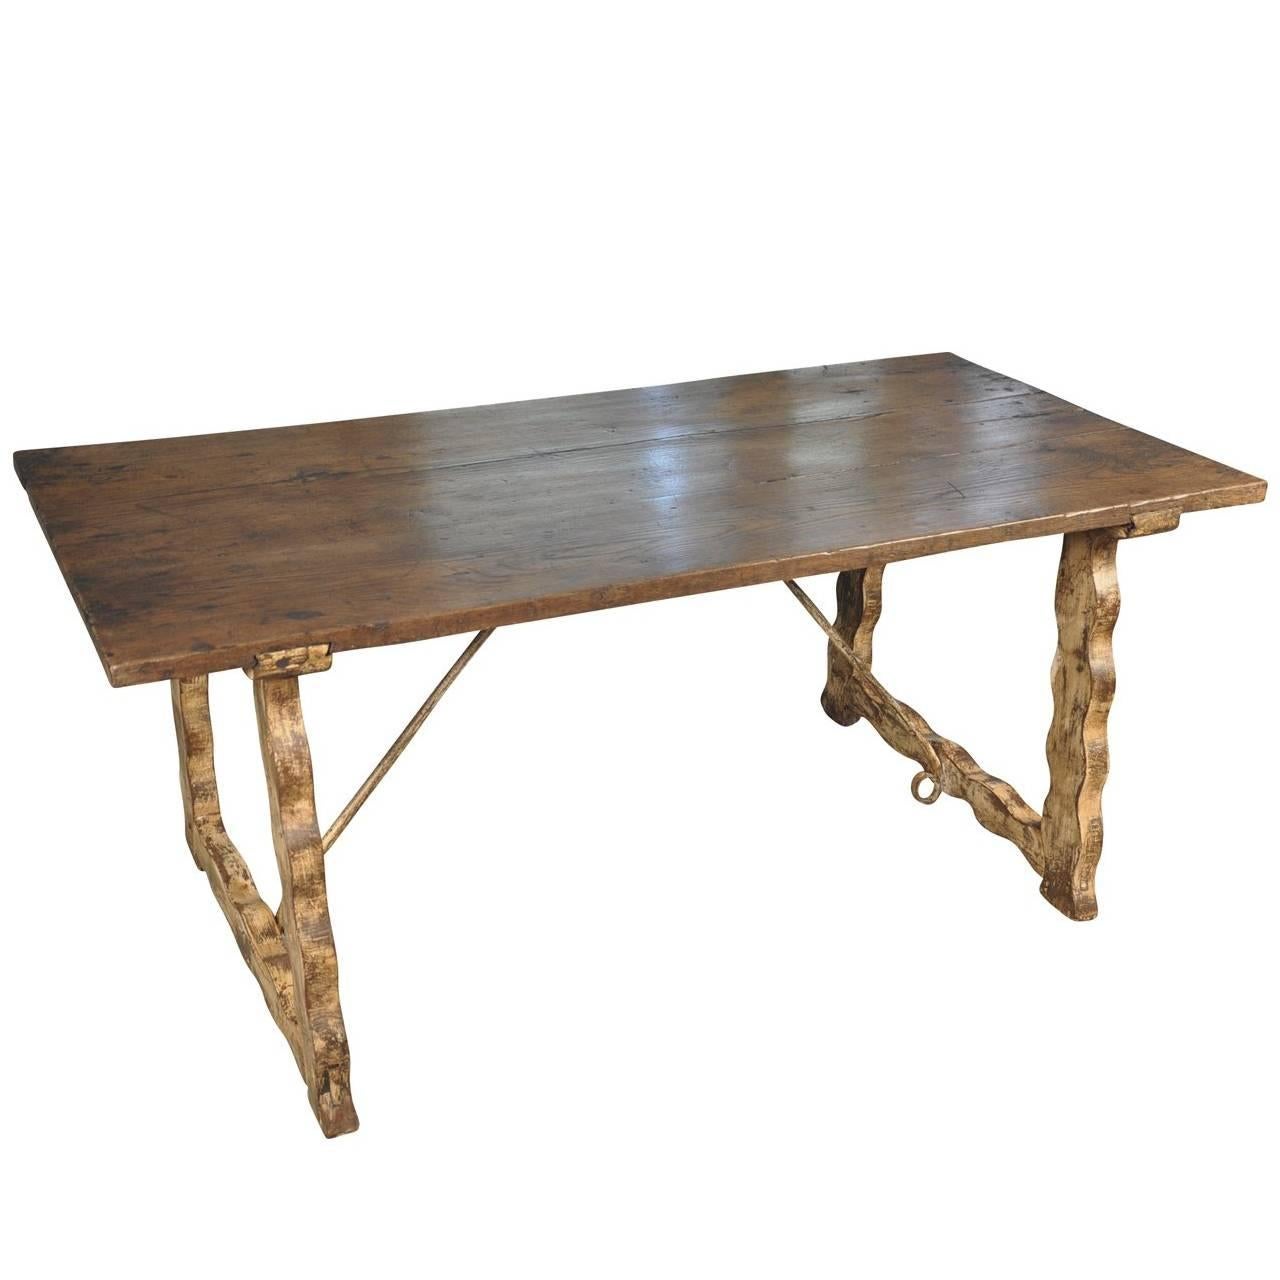 19th Century Farm Table from Portugal